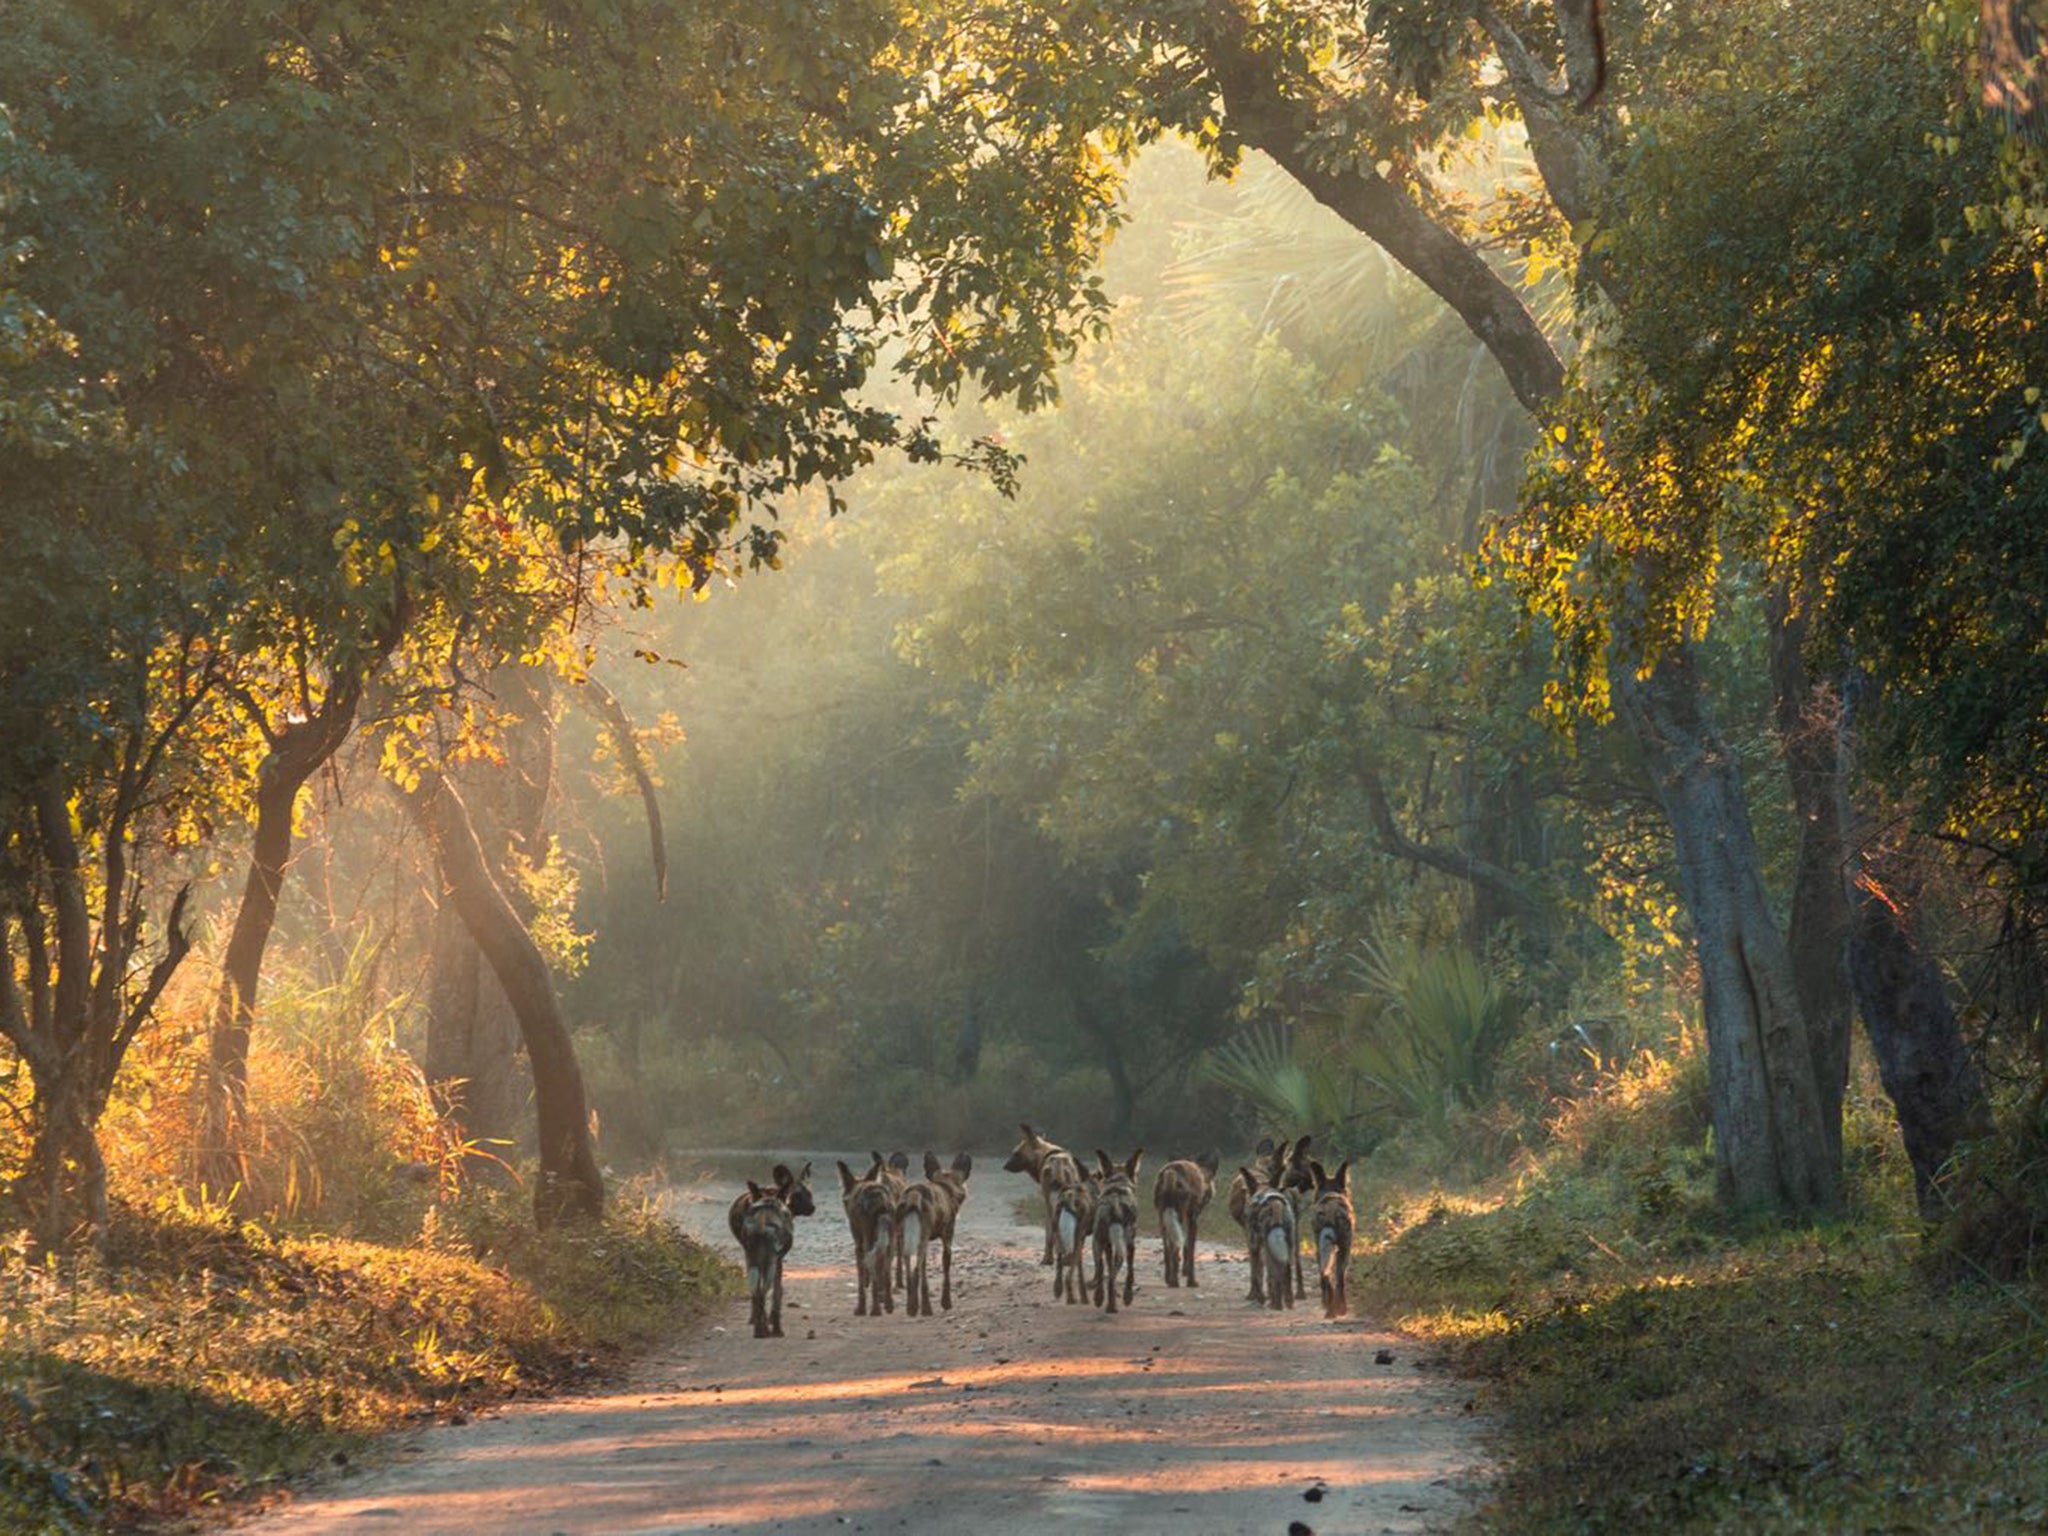 Walking towards a better future: the success is in part down to the reintroduction of carnivore species such as wild dogs